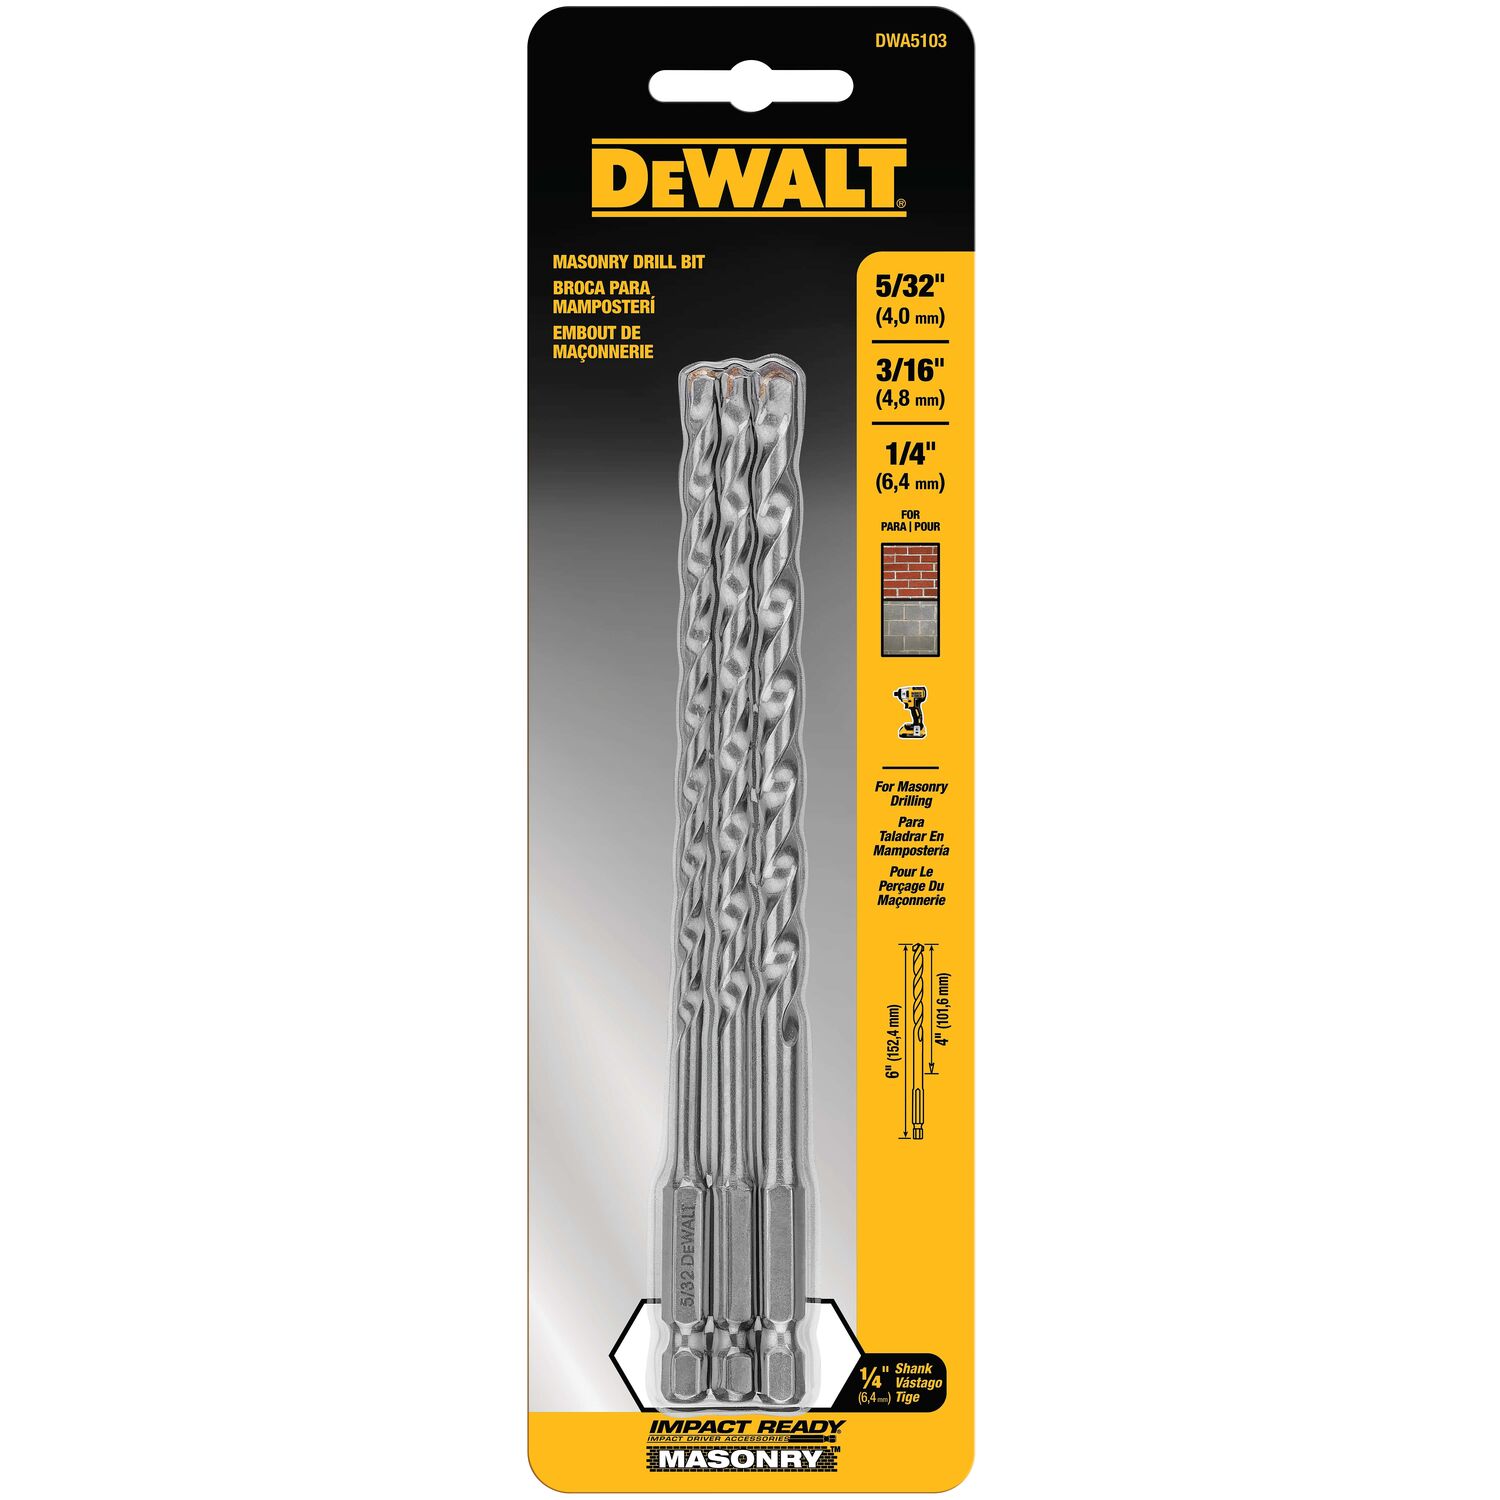 Skulle gnier snatch DEWALT 3-Piece Carbide Masonry Drill Bit Set for Rotary Drill/Impact Driver  in the Masonry Drill Bits department at Lowes.com